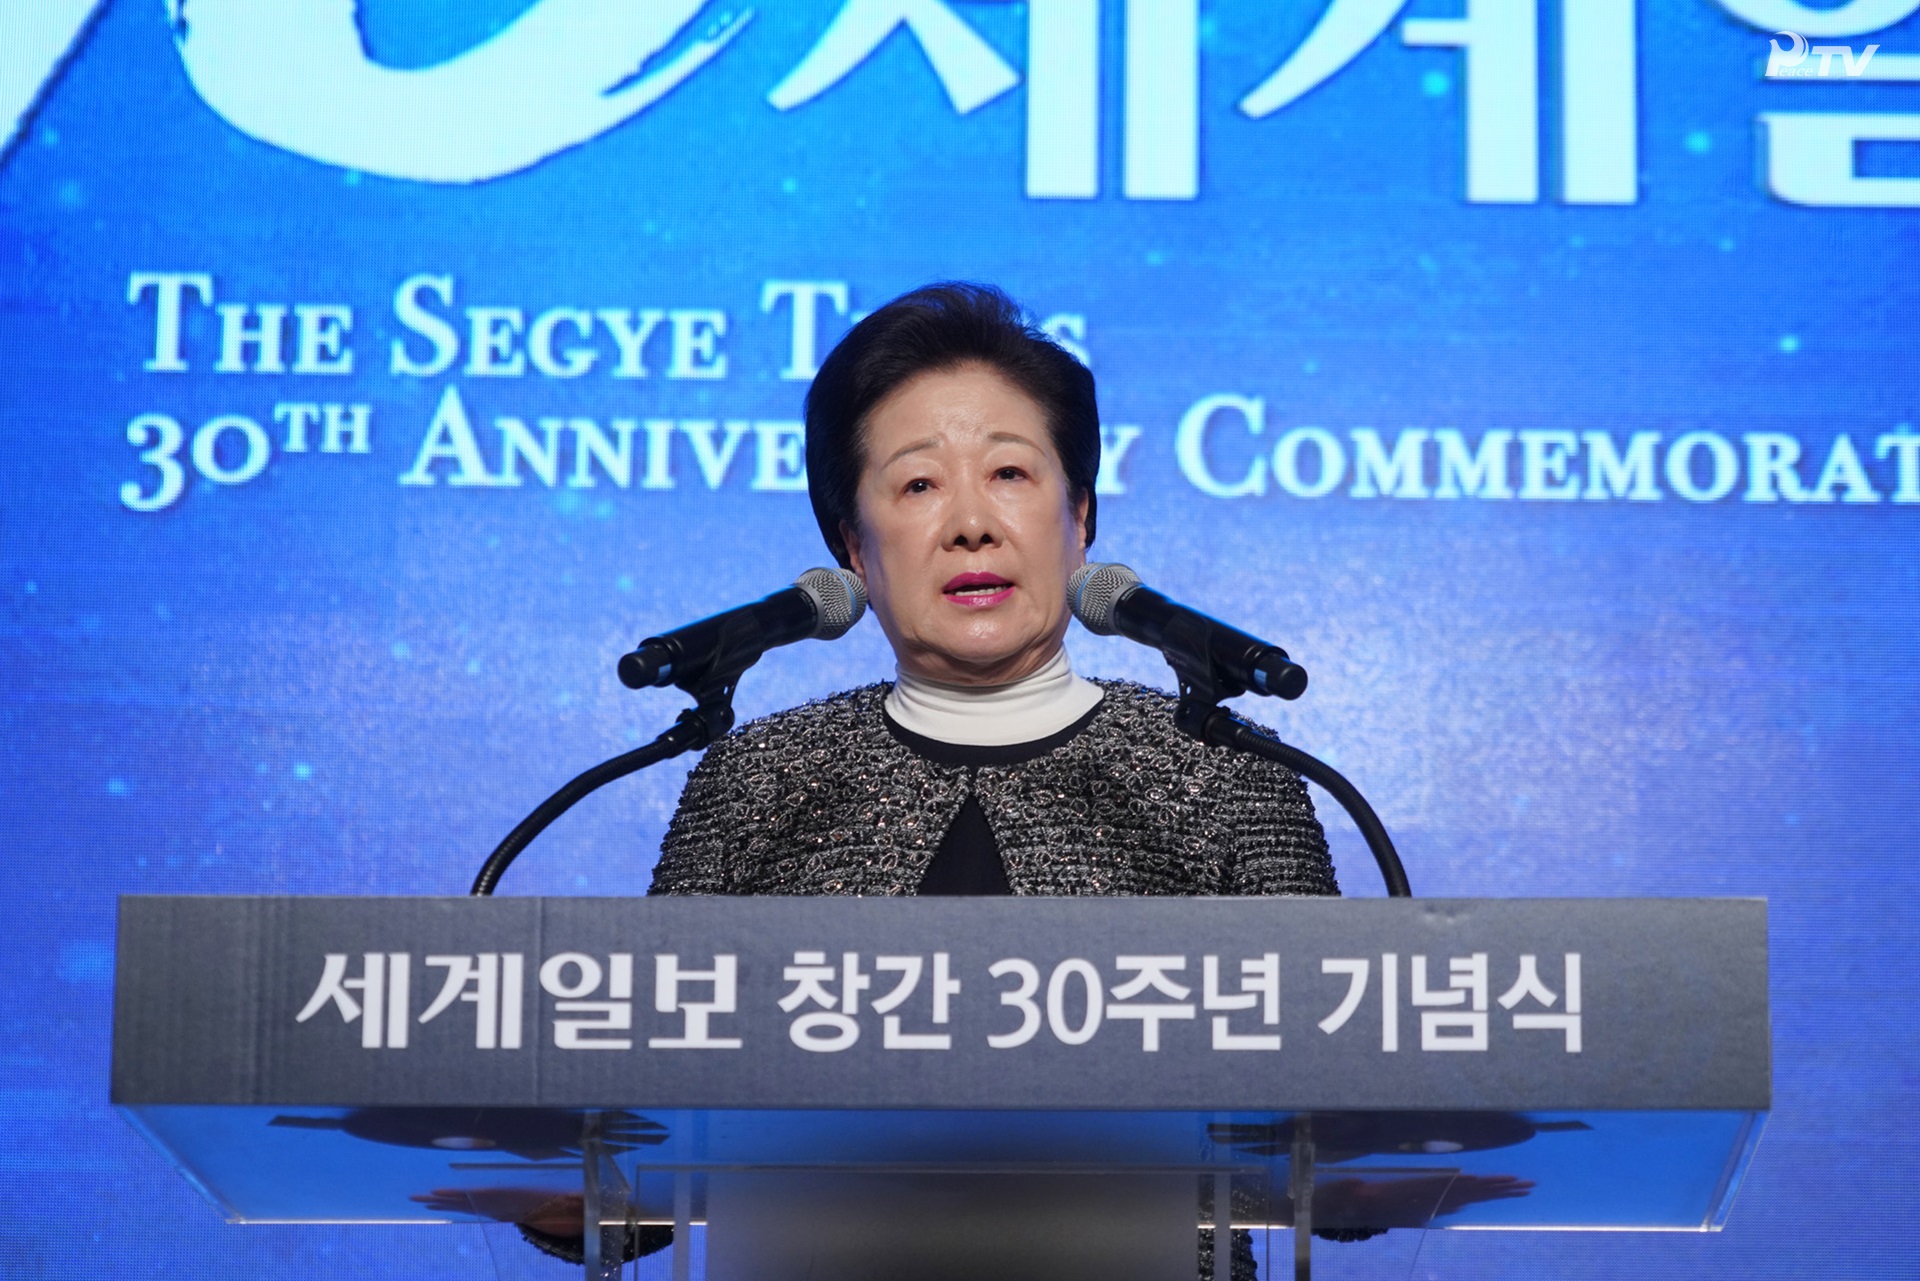 30th Anniversary of the Founding of the Segye Times (February 11, 2019)